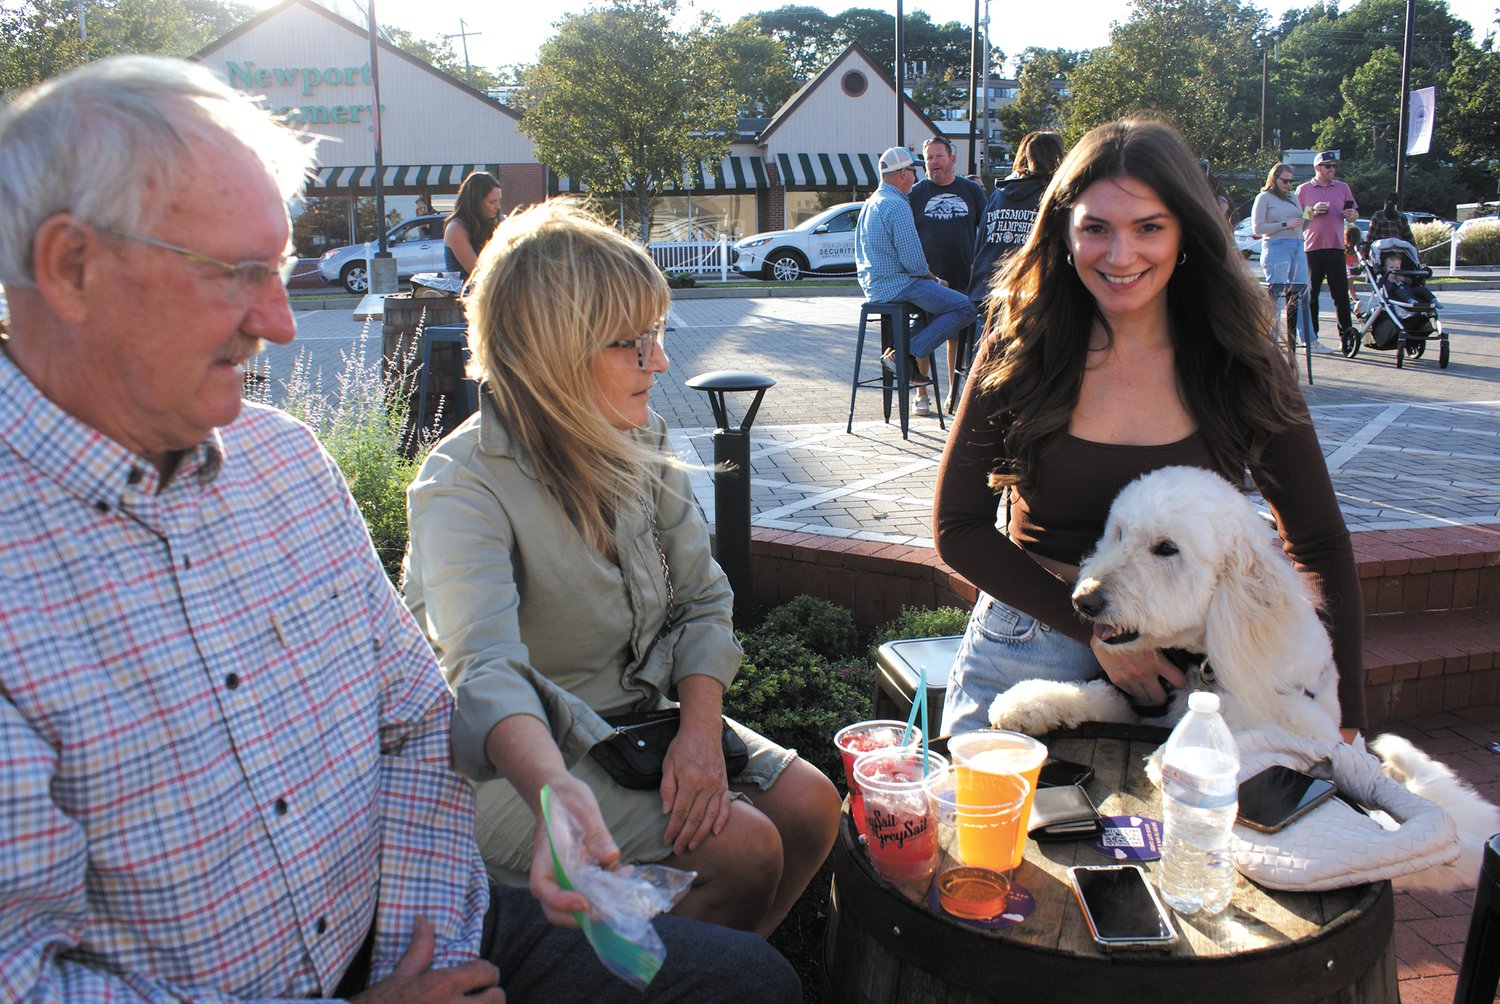 ENJOYING THE DAY: (From left) Nick and Krista Barney and Brianna Lawless with her four-year-old golden doodle Stella enjoy a nice summer day at Garden City’s event.